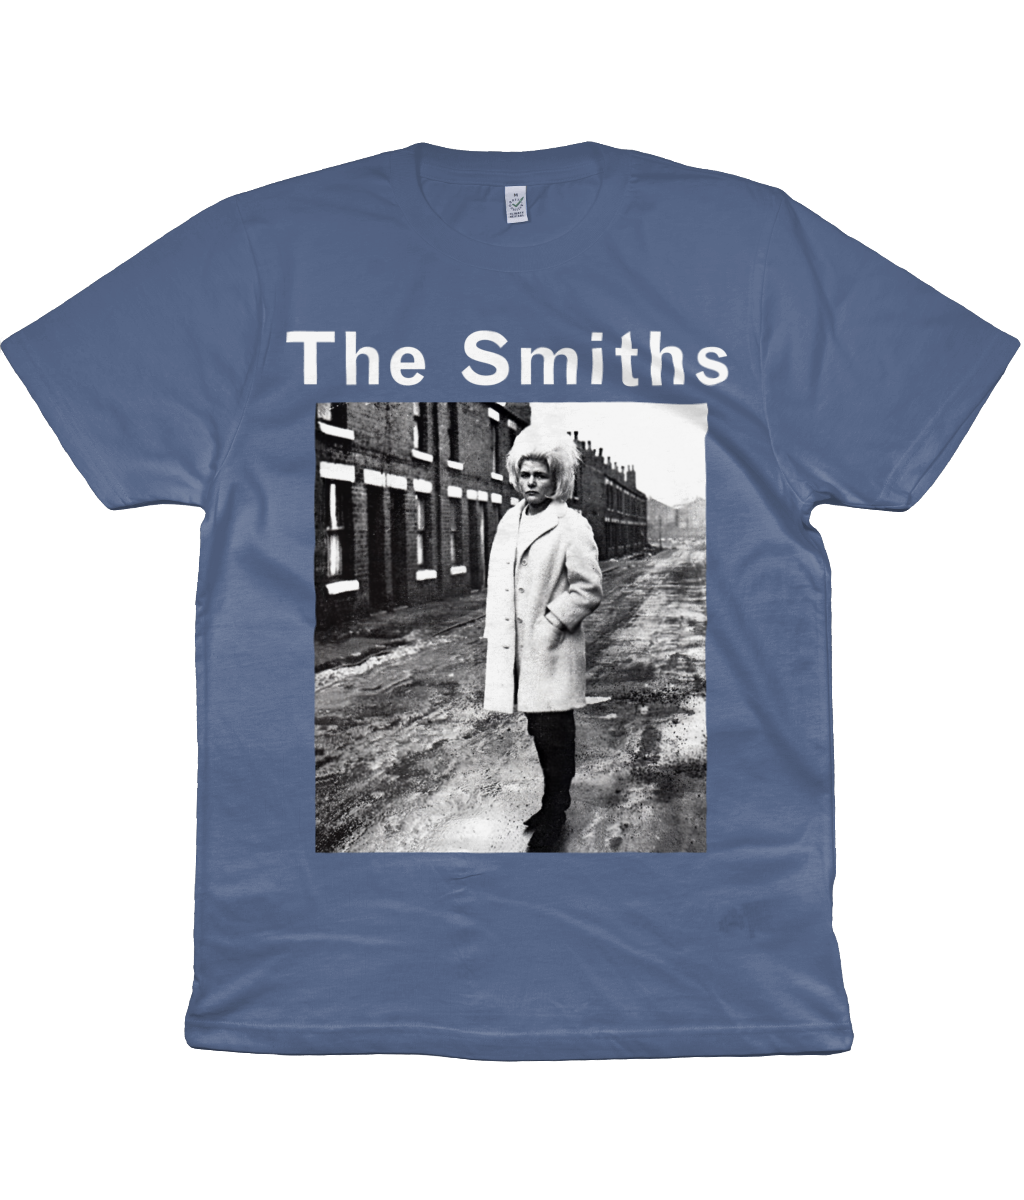 The Smiths - Heaven Knows I'm Miserable Now - 1984 Promo